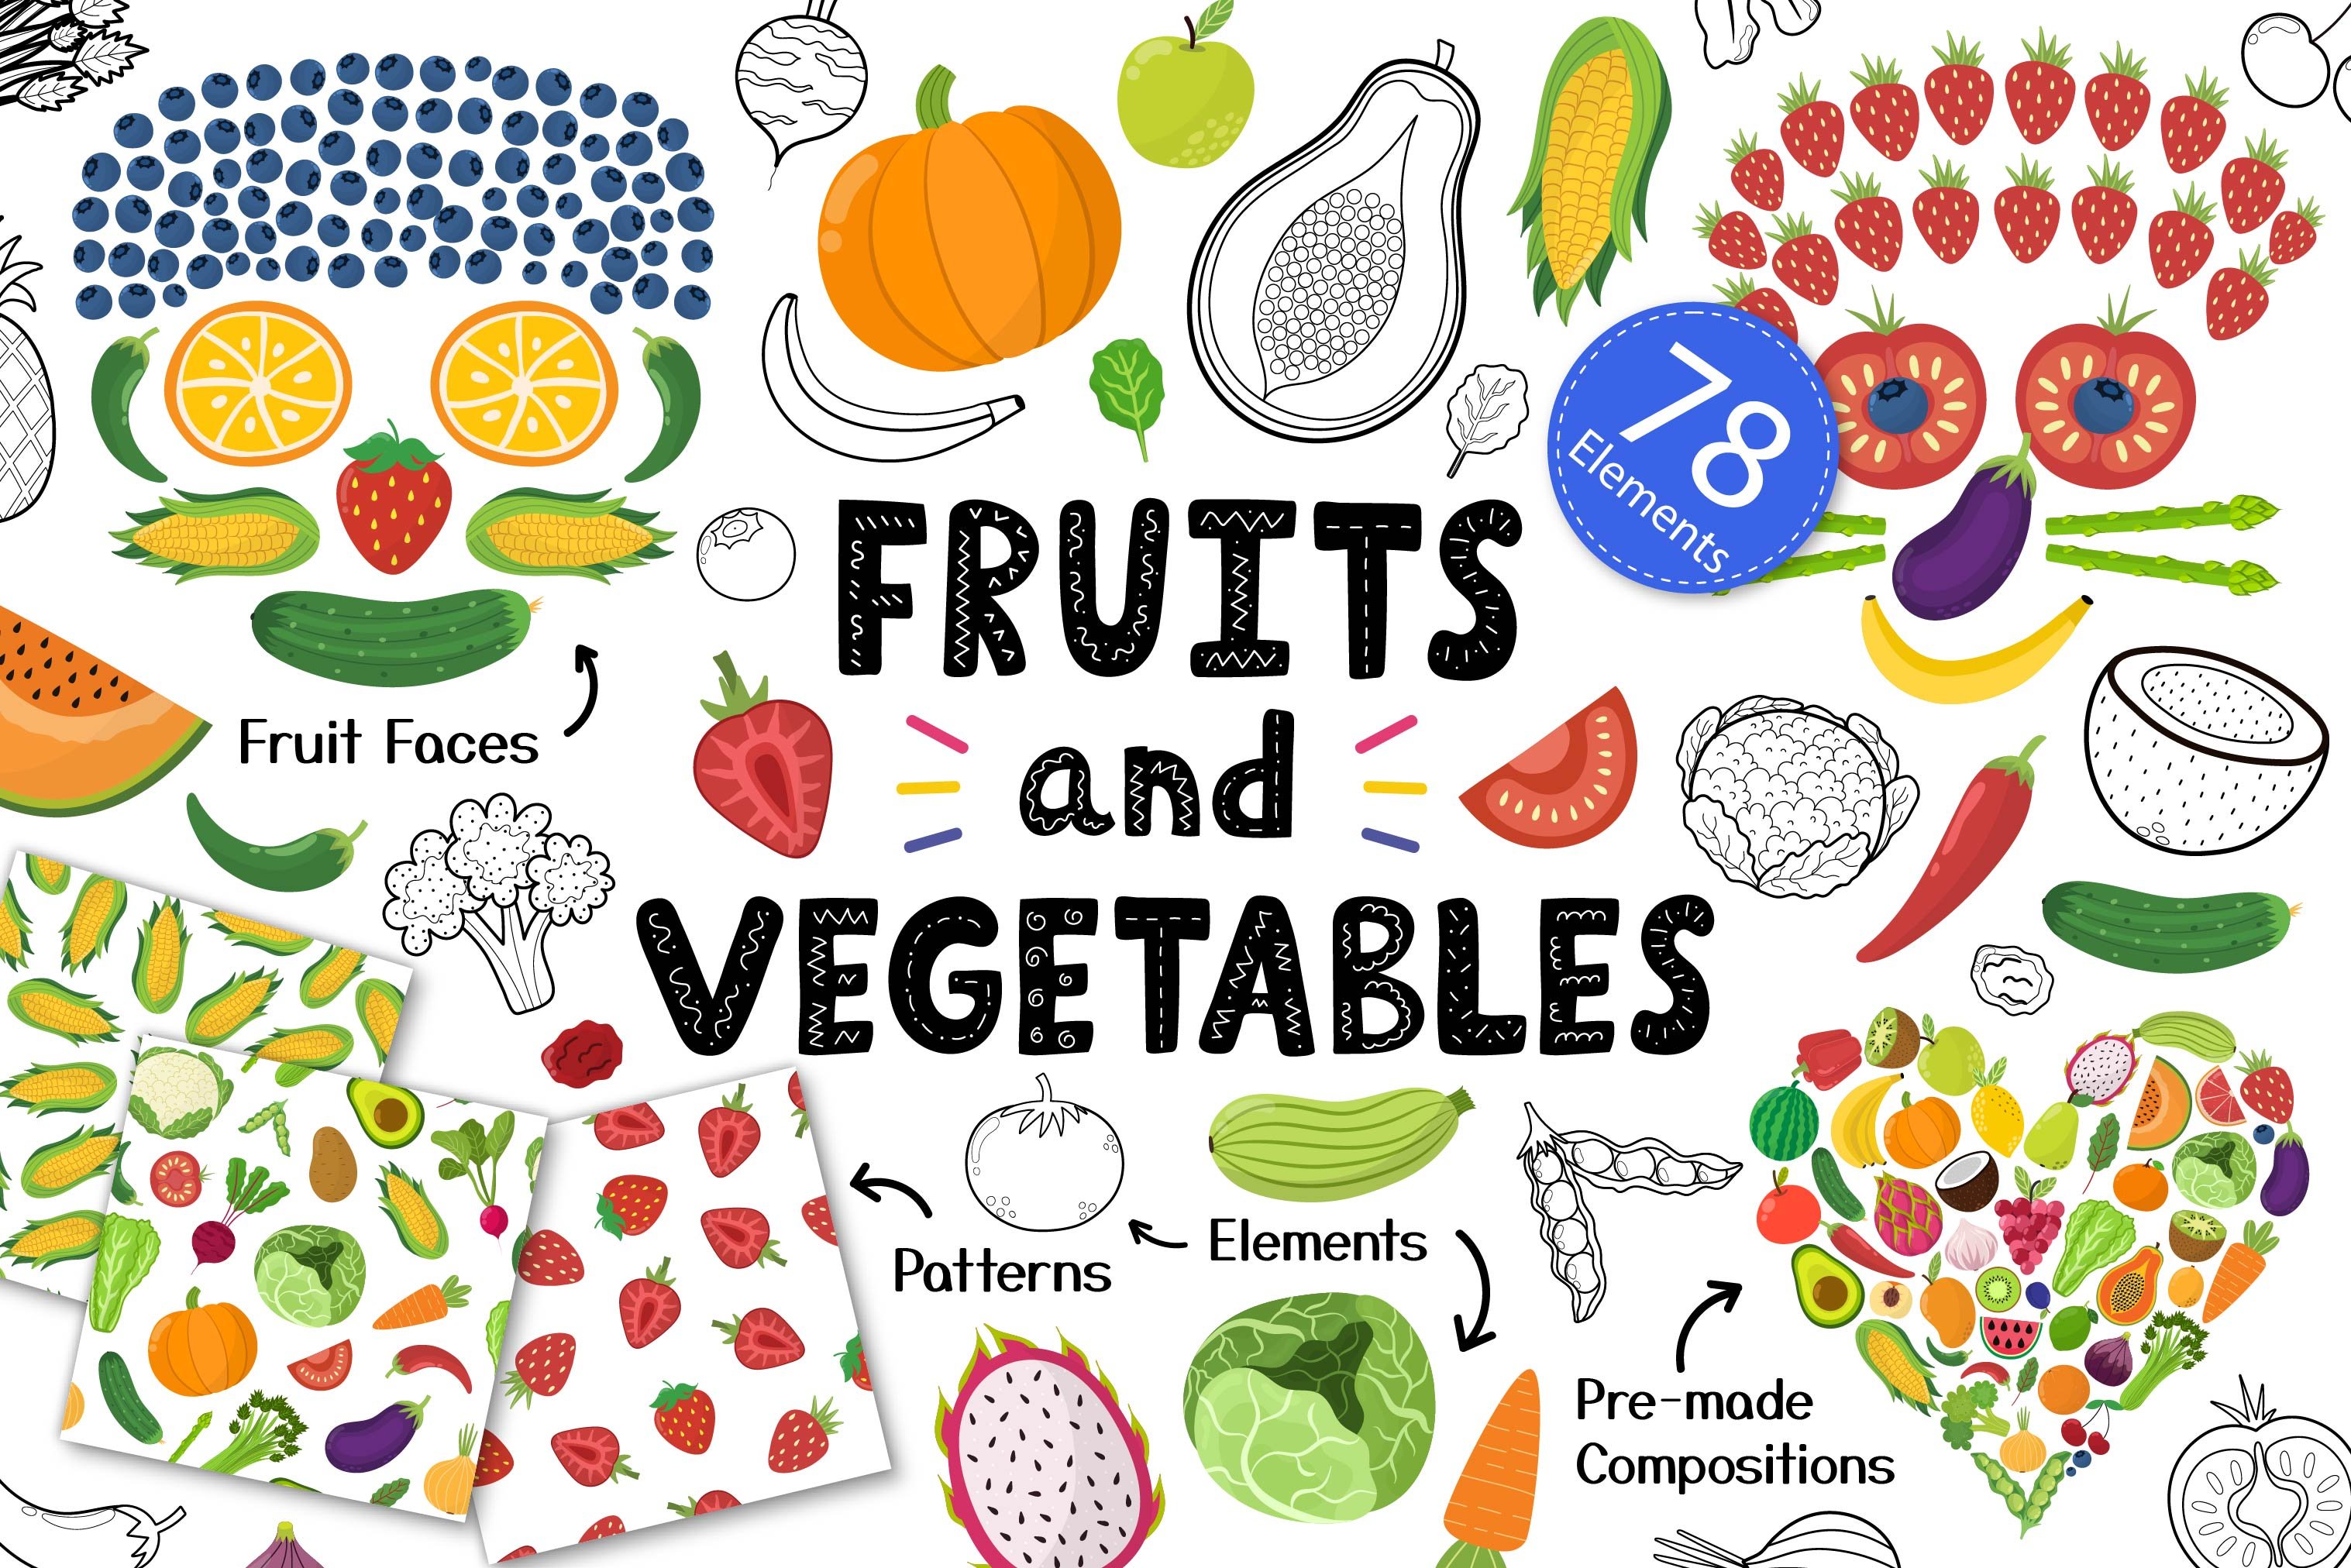 Fruits and Vegetables Collection cover image.